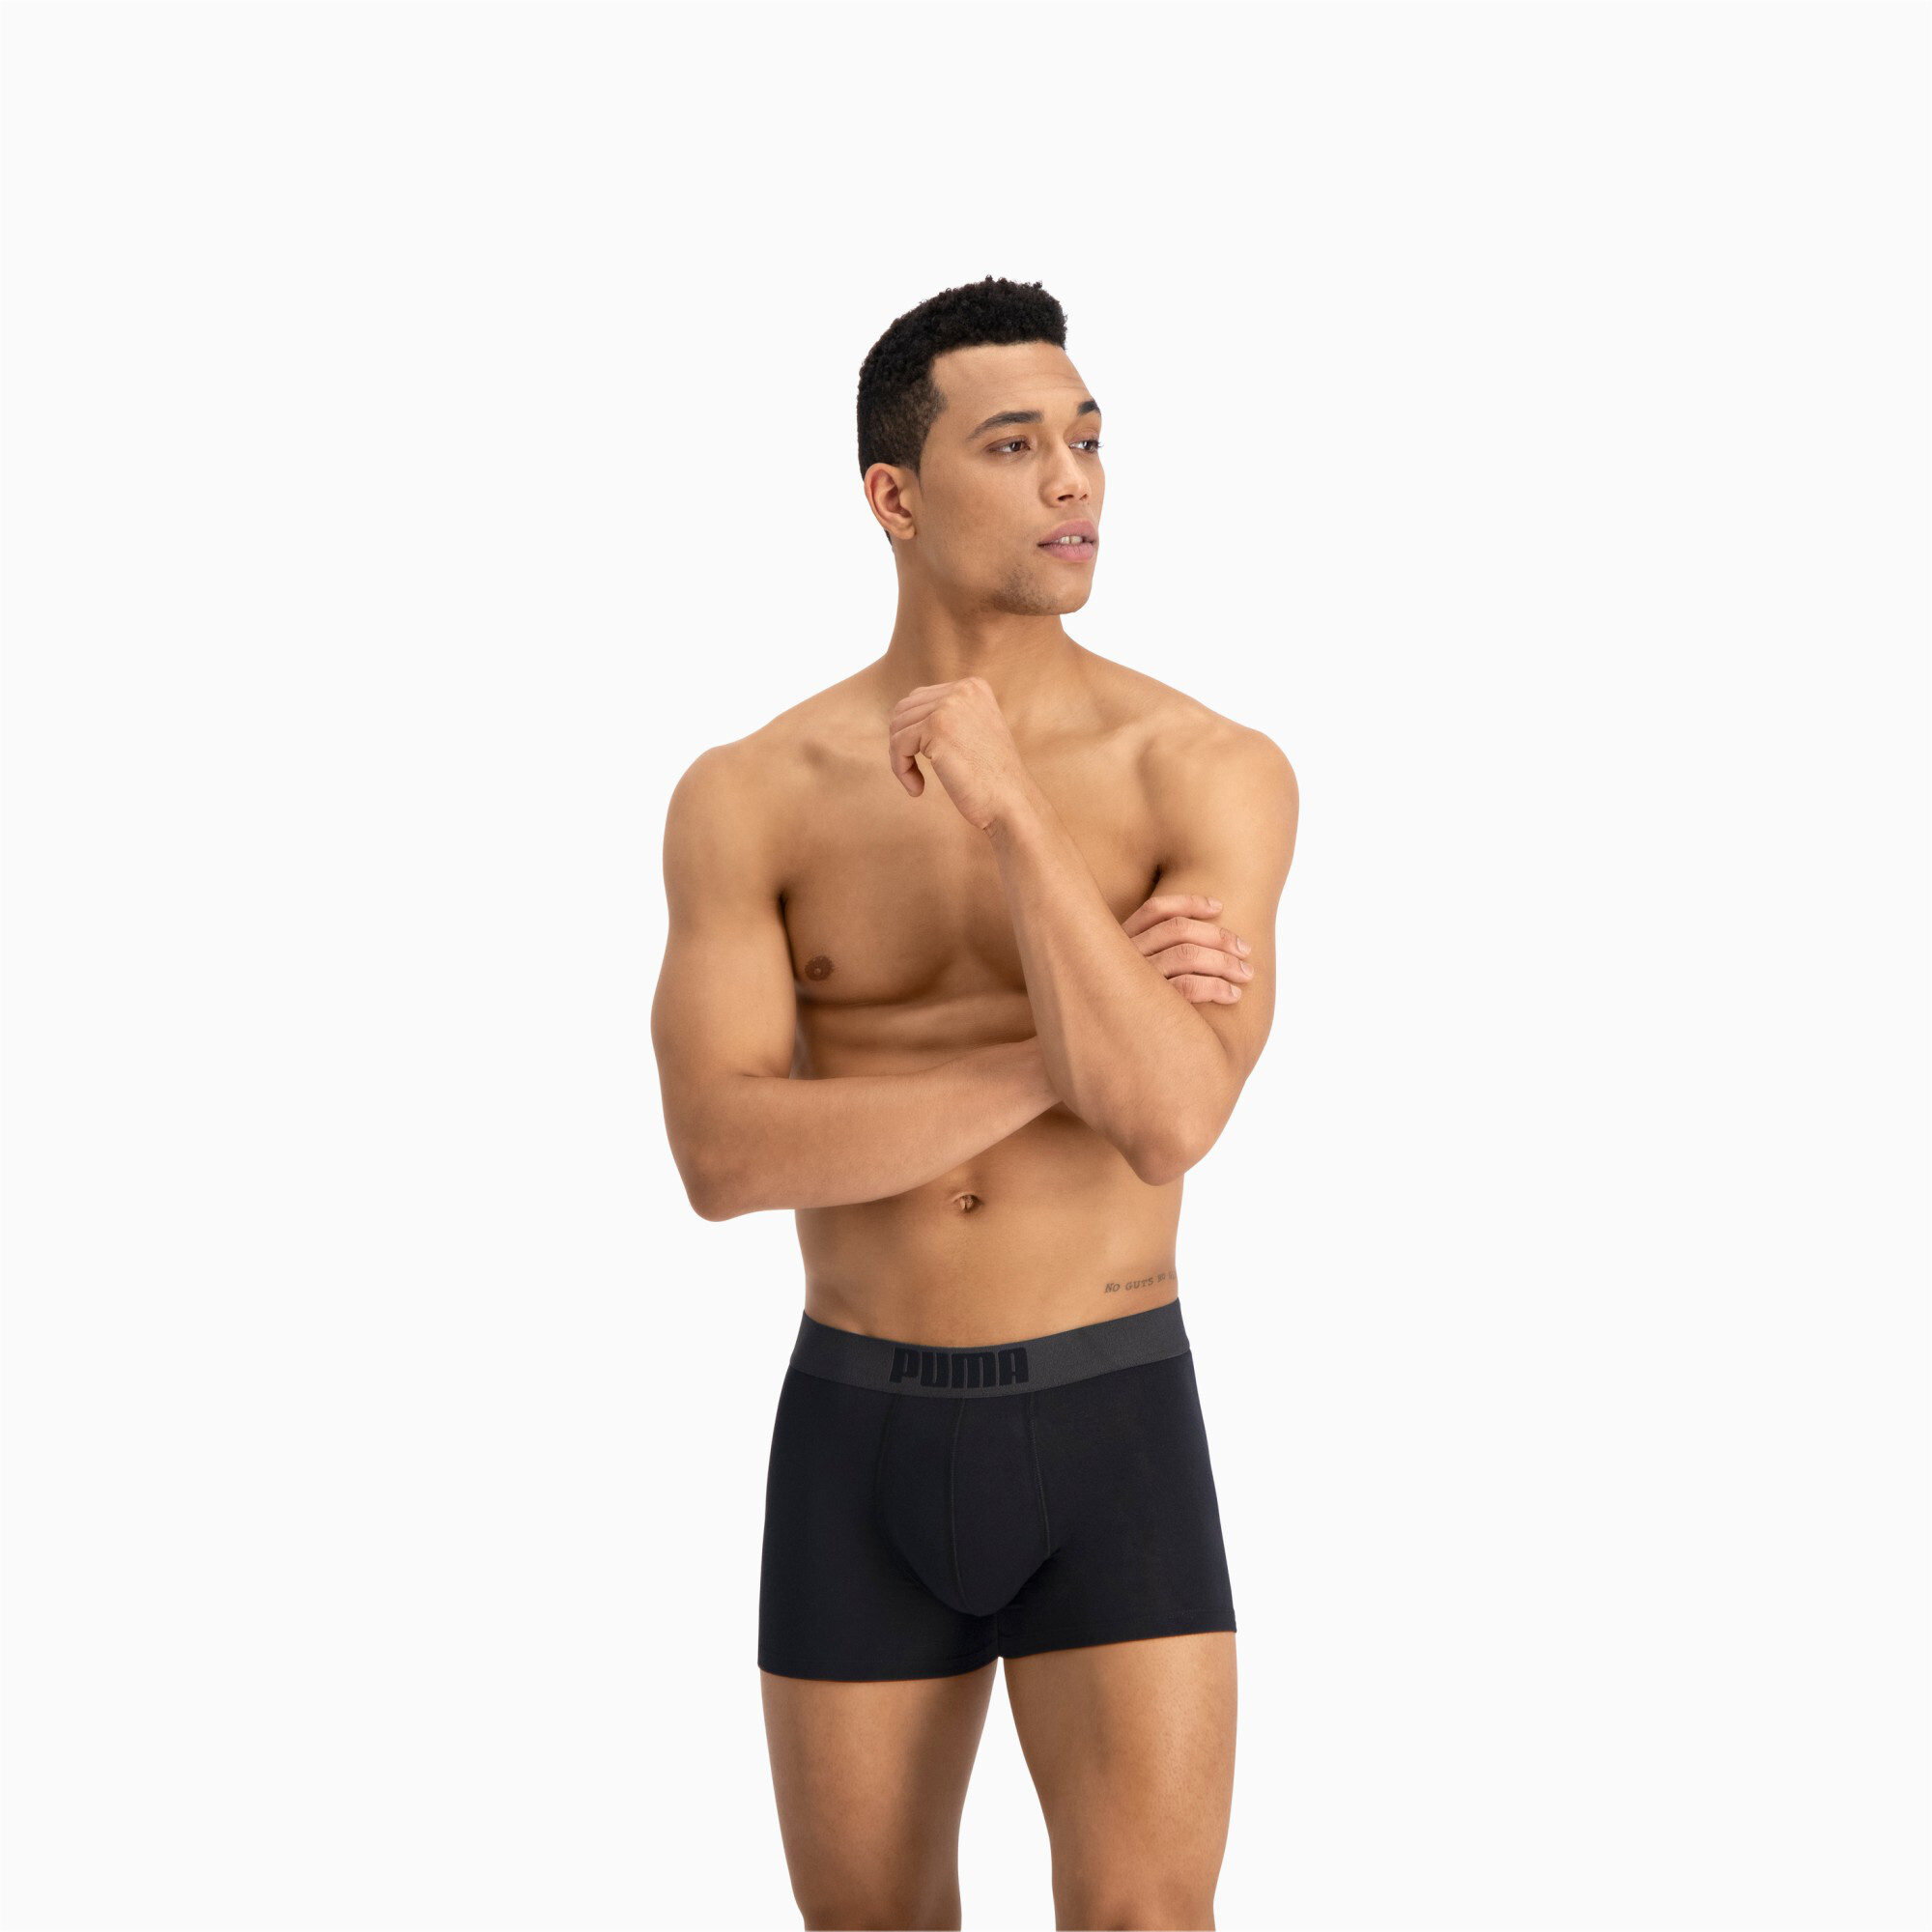 Men's PUMA Placed Logo Boxers 2 Pack In Black, Size Small